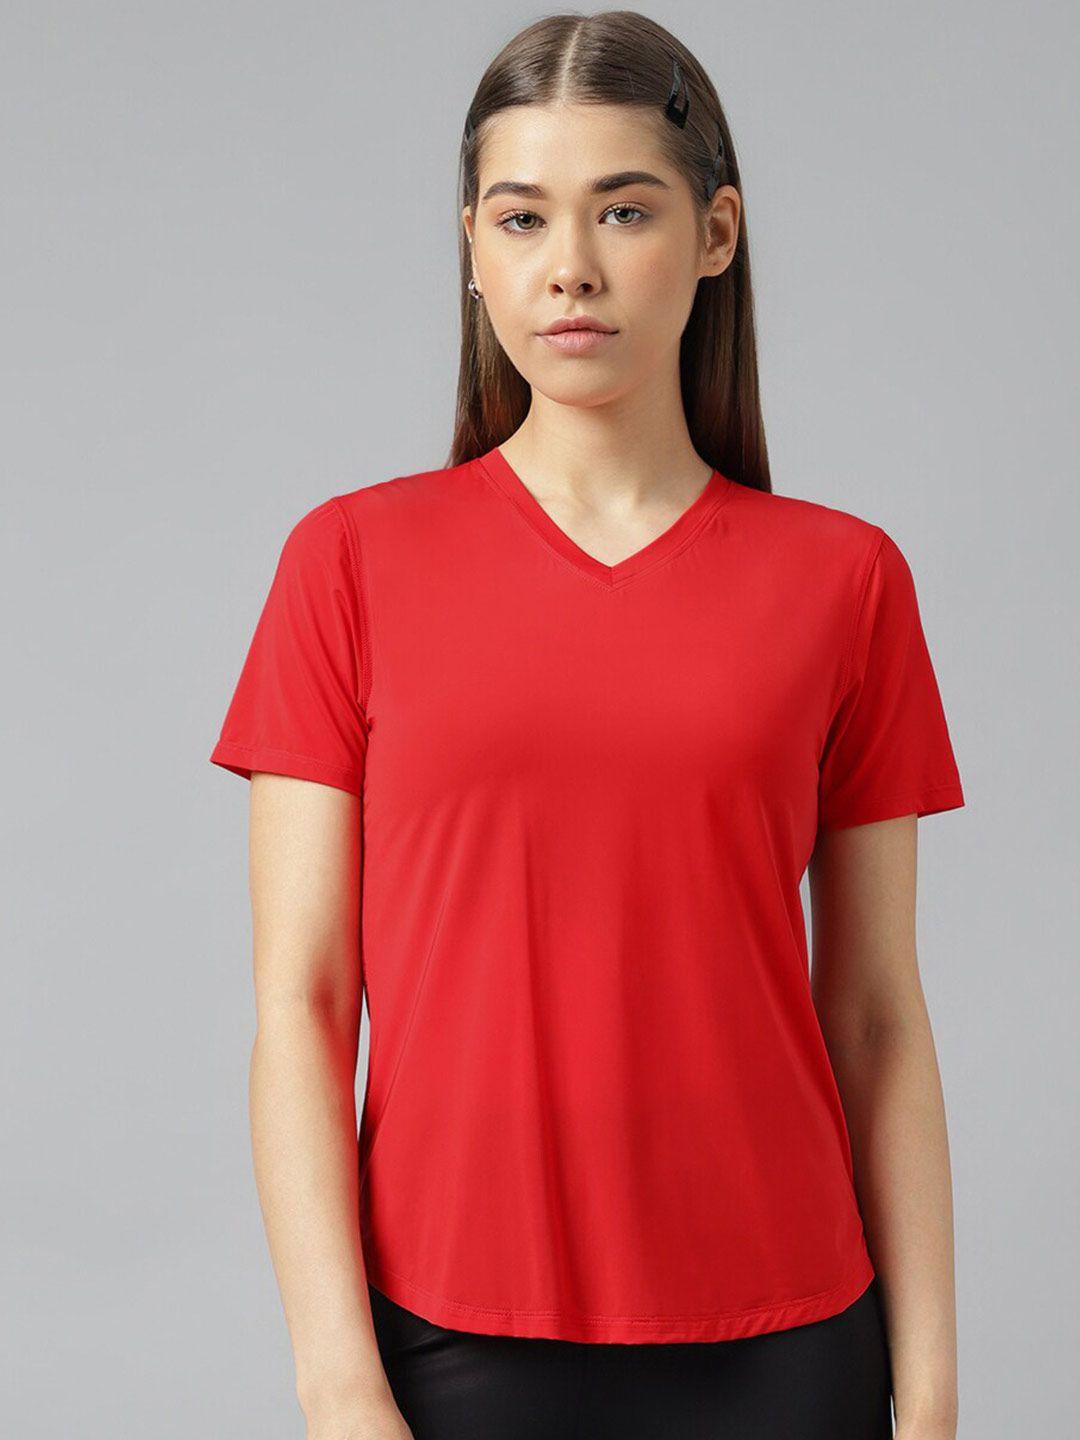 fitkin v-neck anti odour relaxed fit sport t-shirt